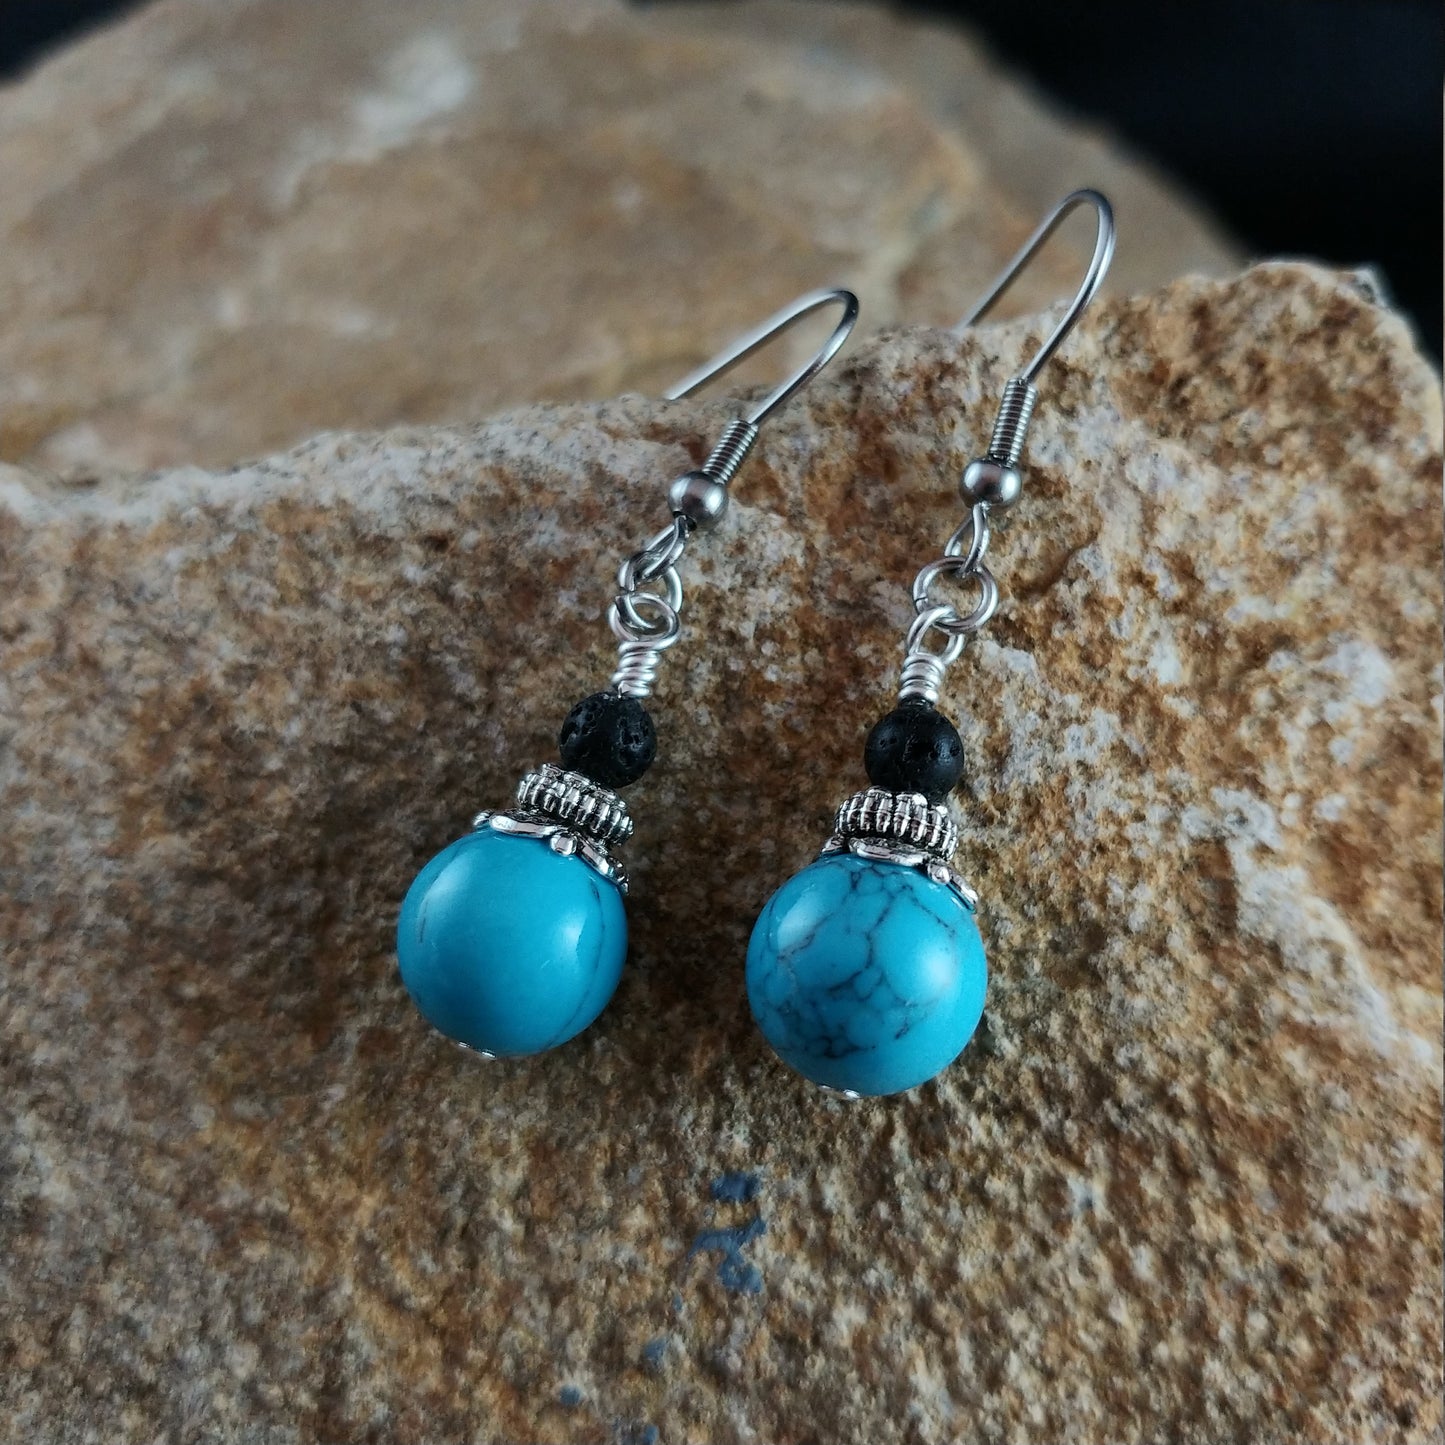 earrings with a small lava bead and on the bottom larger 10mm Blue Turquoise beads. between the stones there is a silver colored cap.